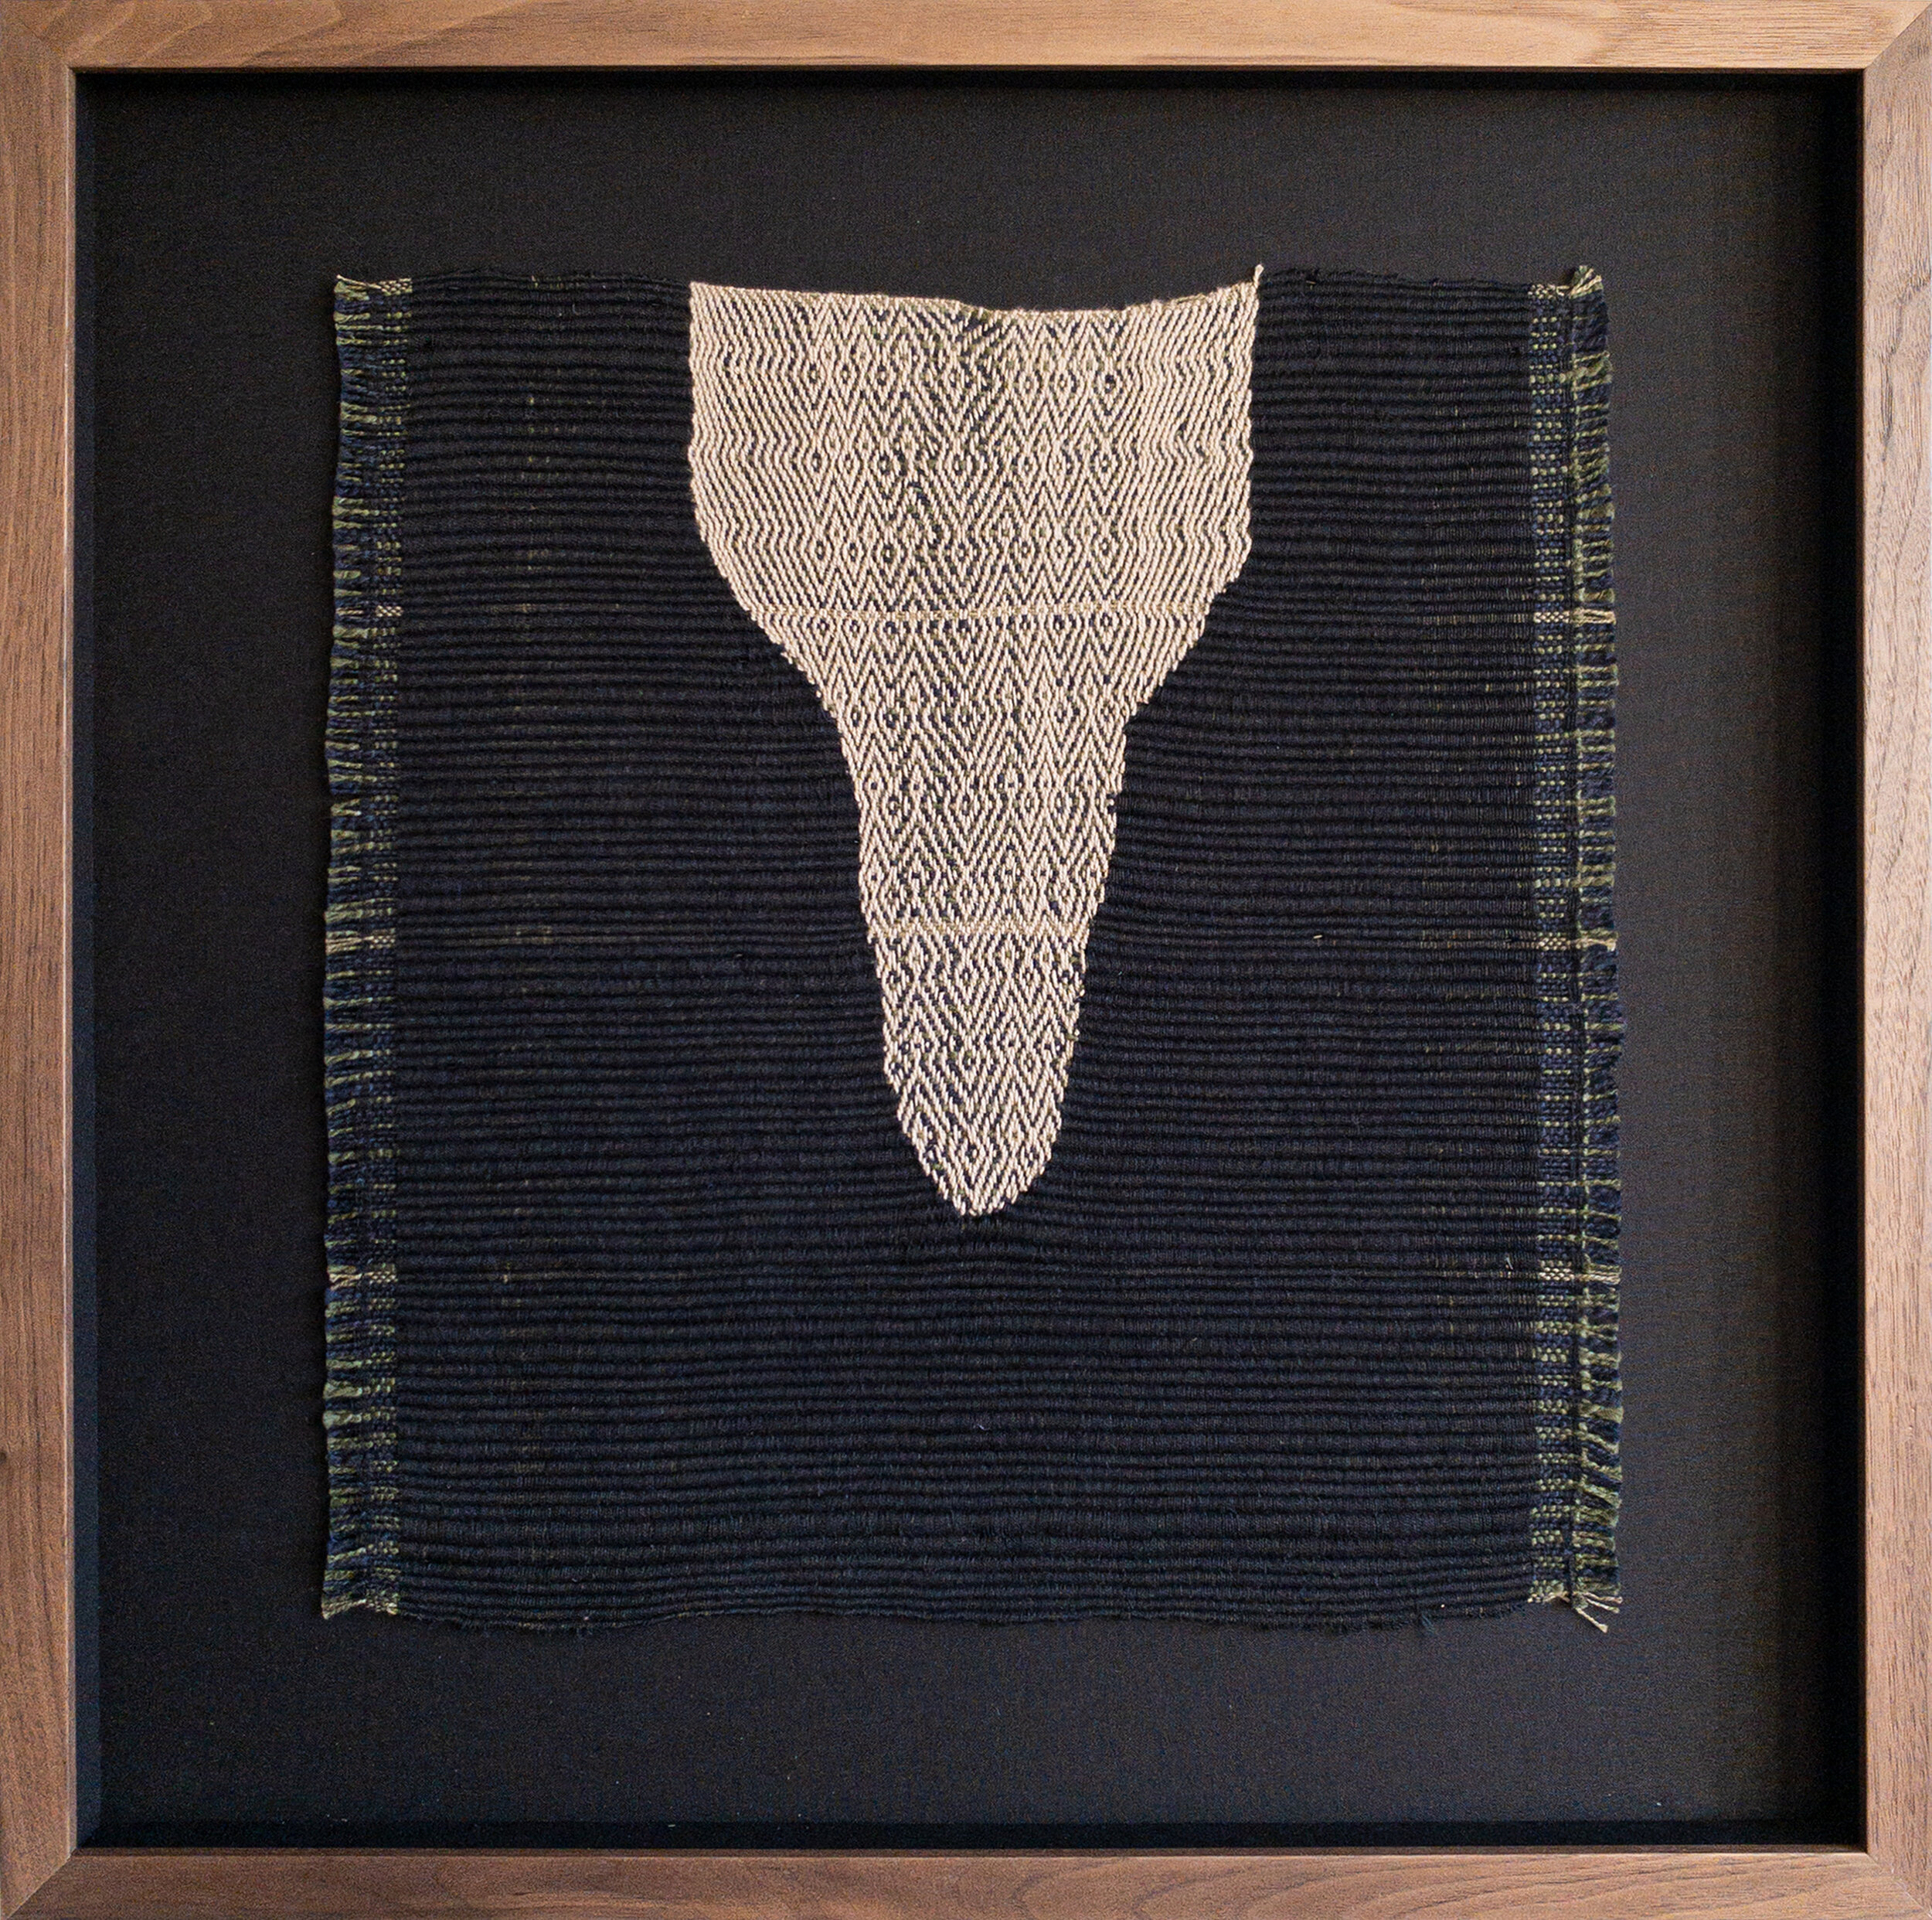 COLOUR AND WEAVE WARP II, 2020, HANDWOVEN COTTON AND LINEN, 15" x 14.5" 